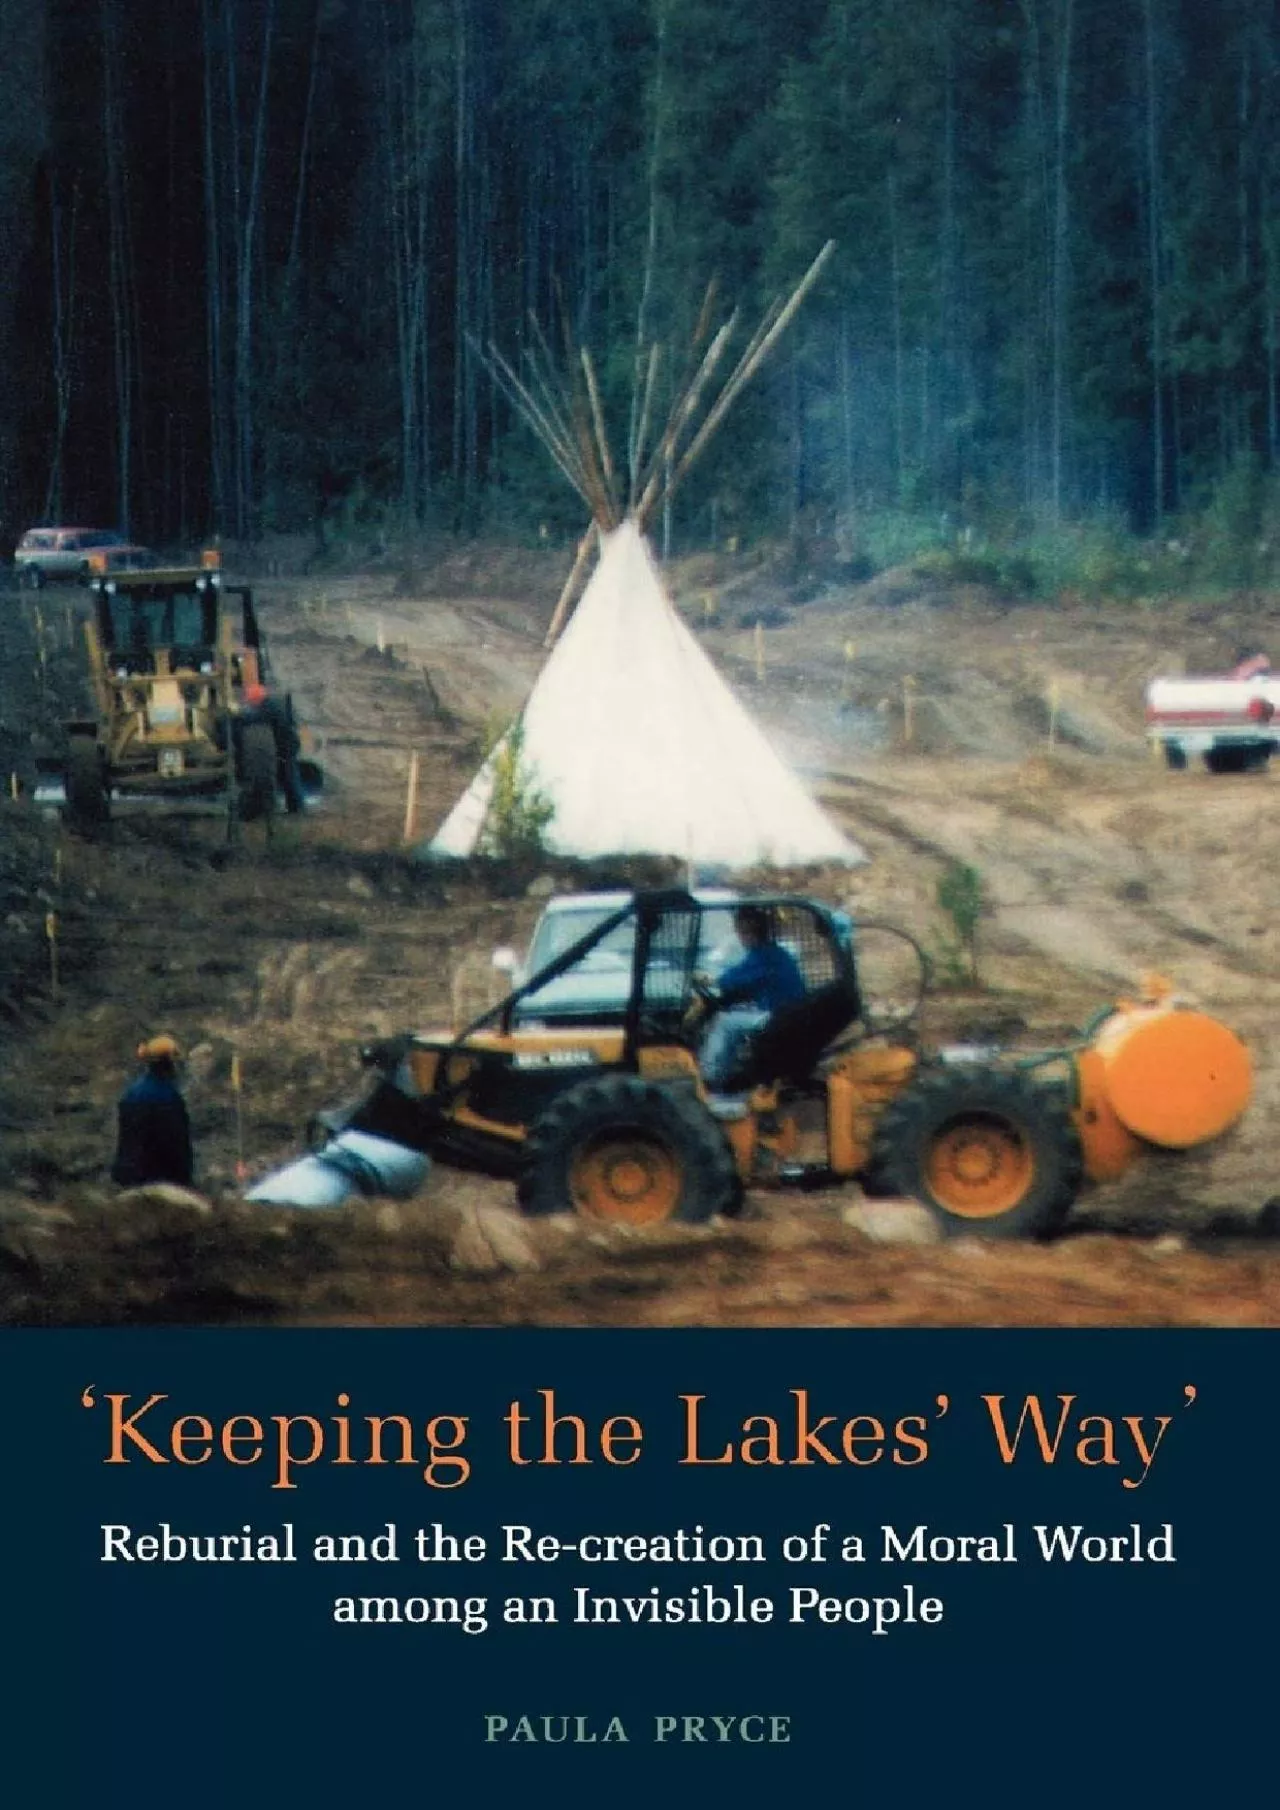 (EBOOK)-Keeping the Lakes\' Way: Reburial and Re-creation of a Moral World among an Invisible